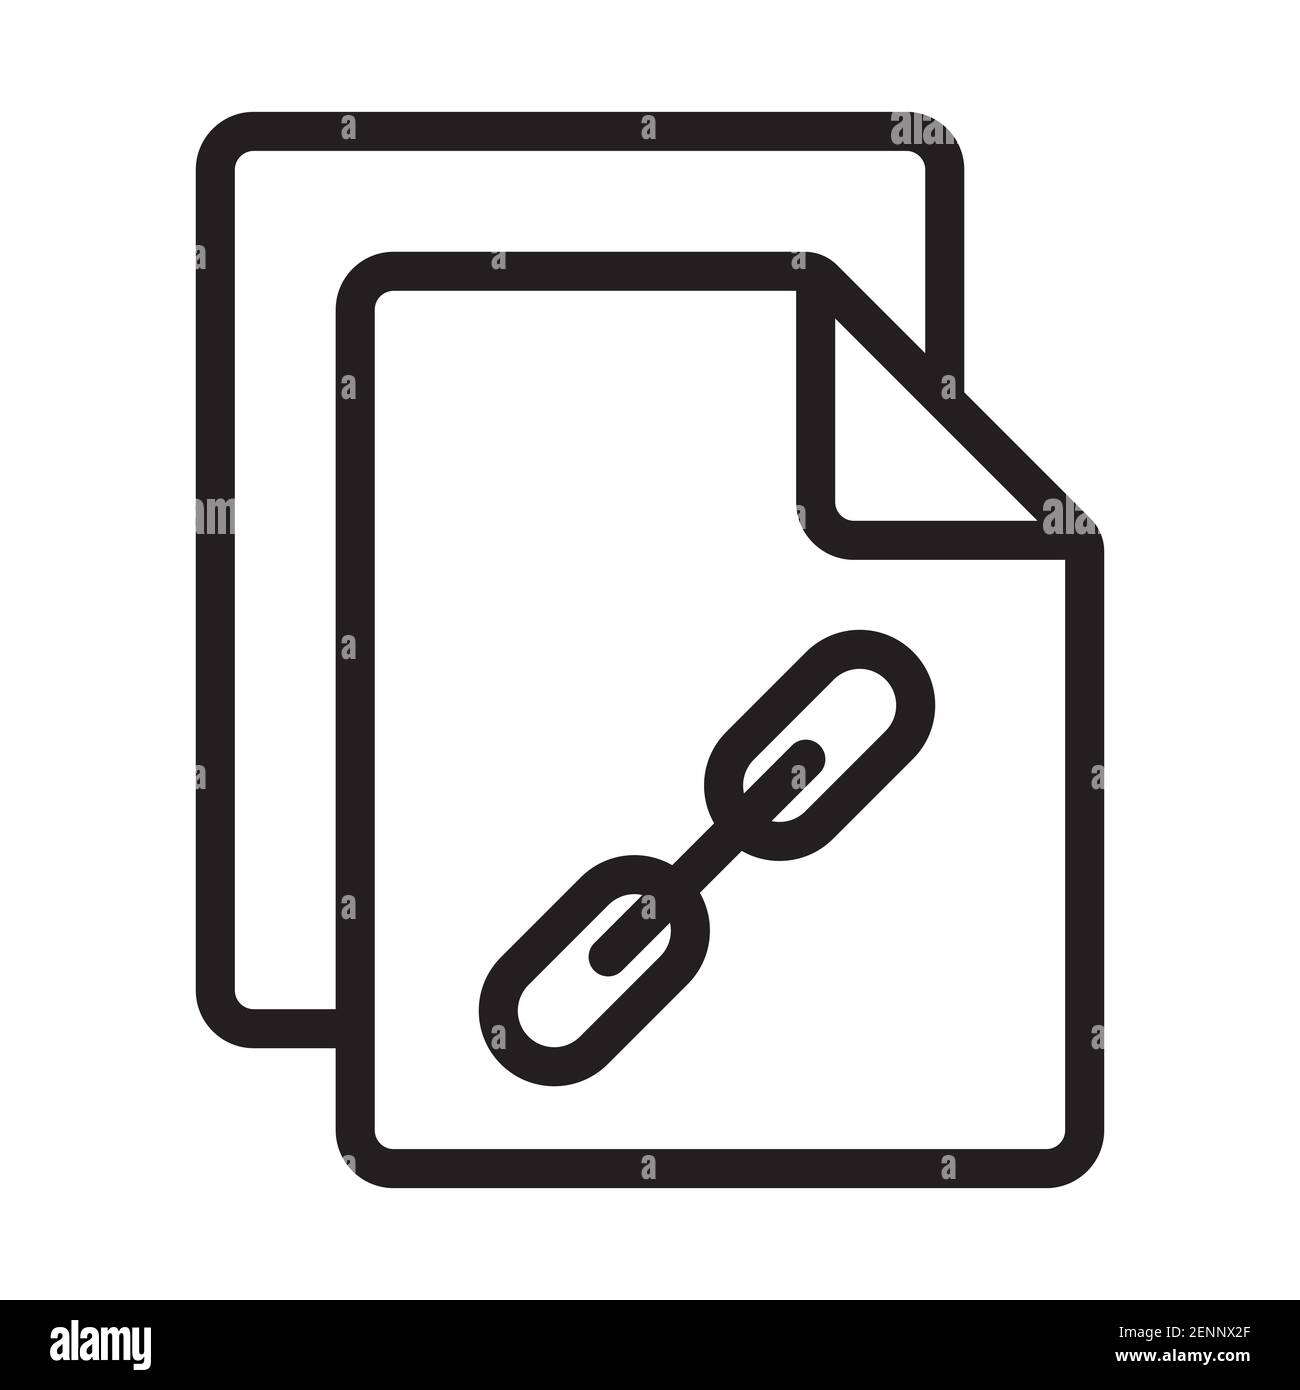 Copy link files line art vector icon for apps and websites Stock Vector